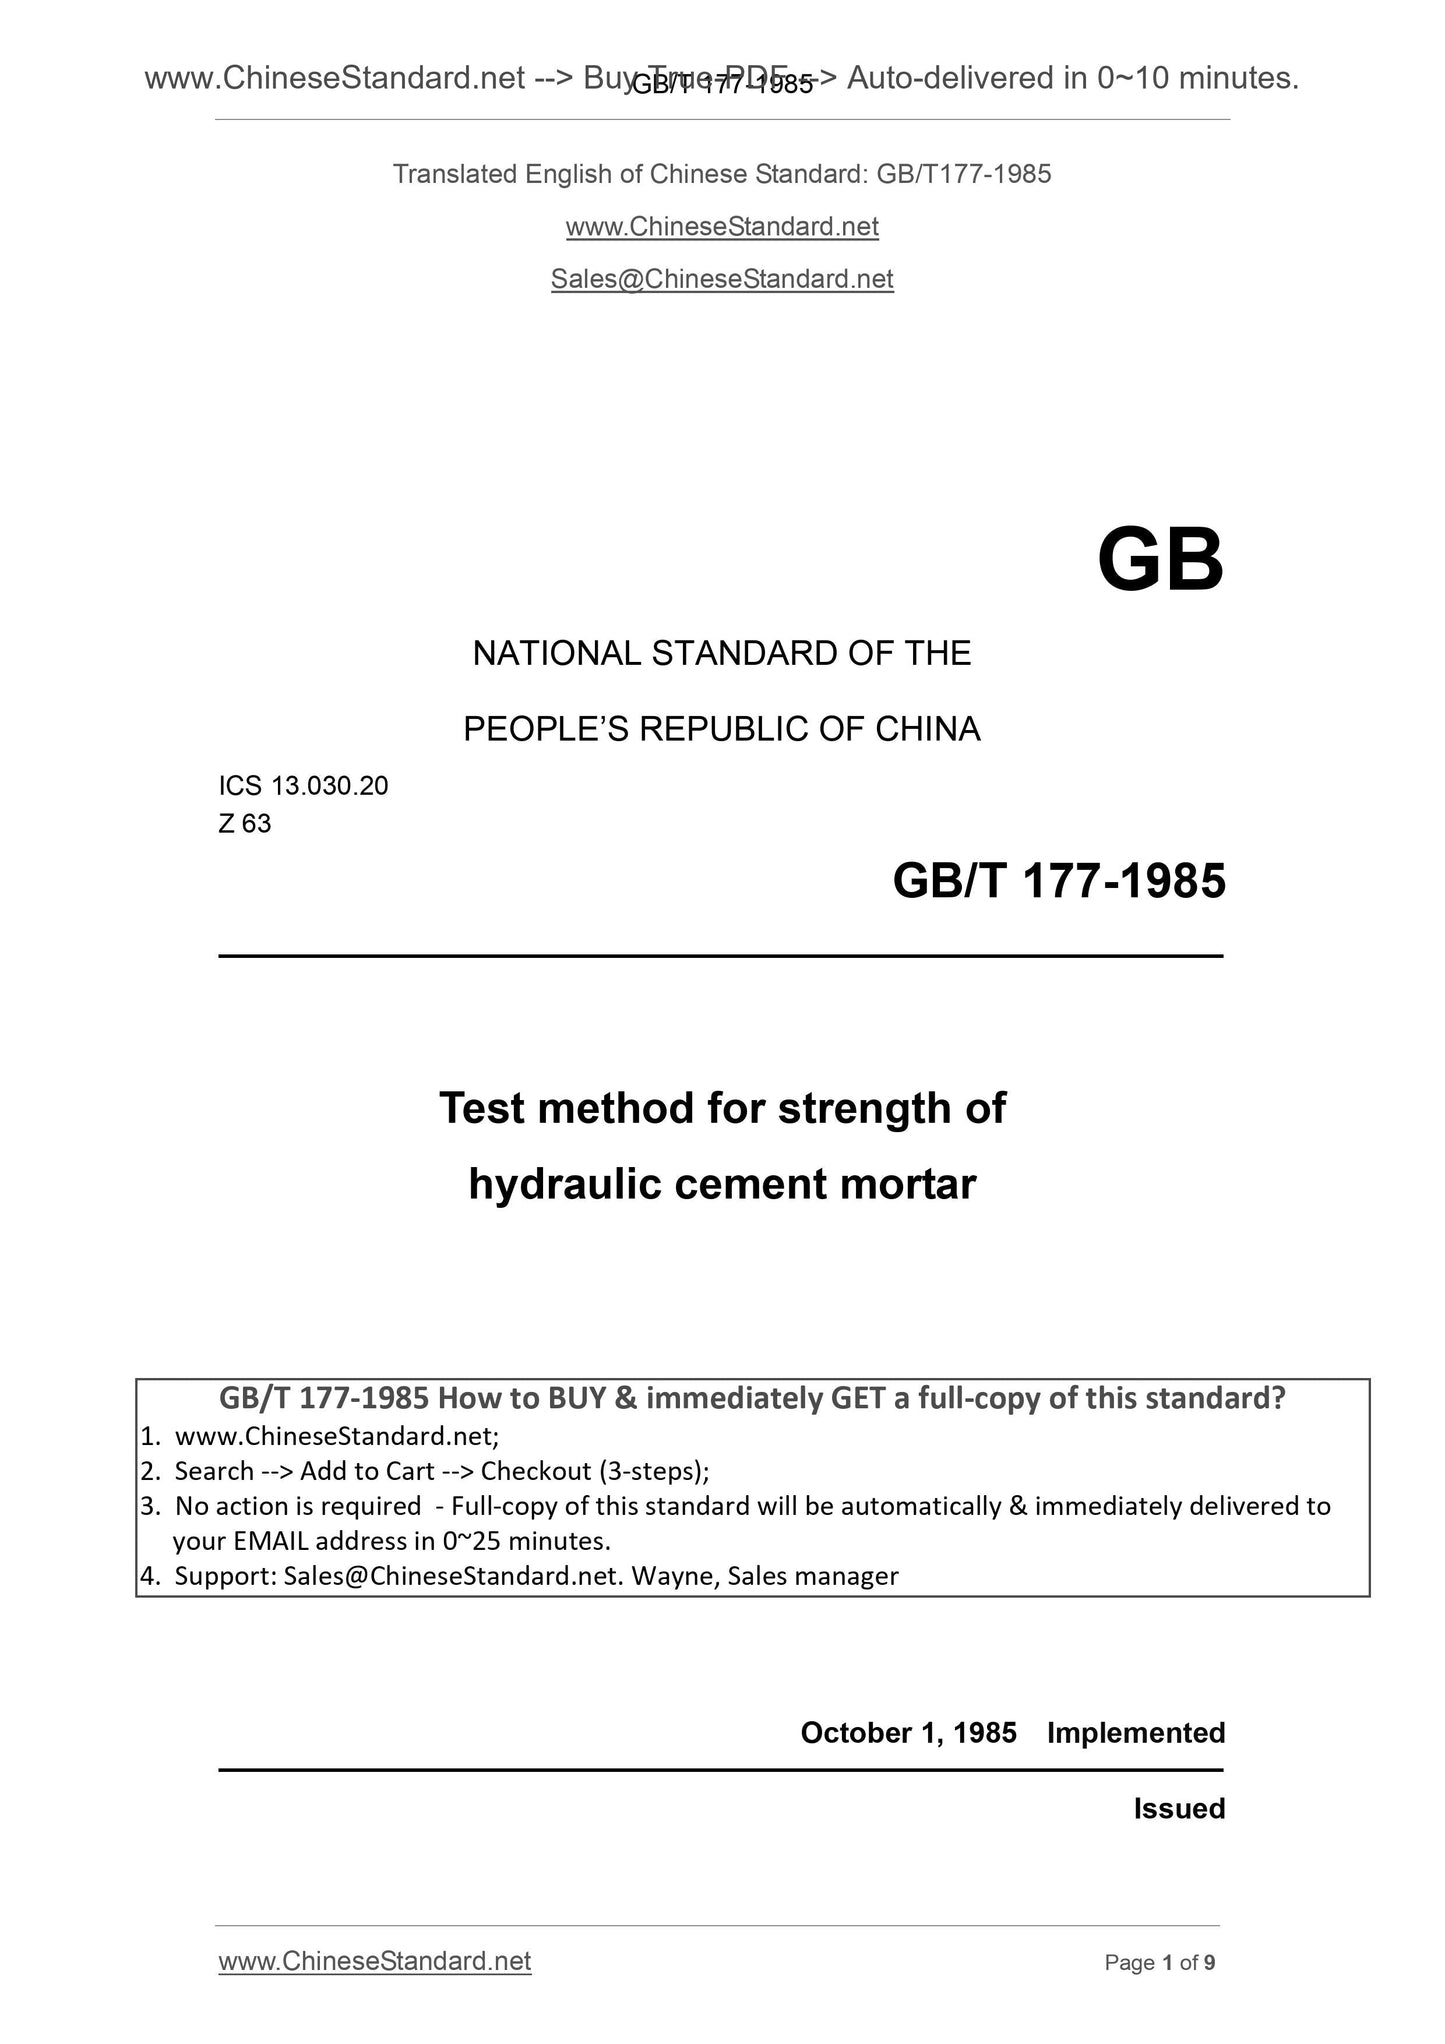 GB/T 177-1985 Page 1